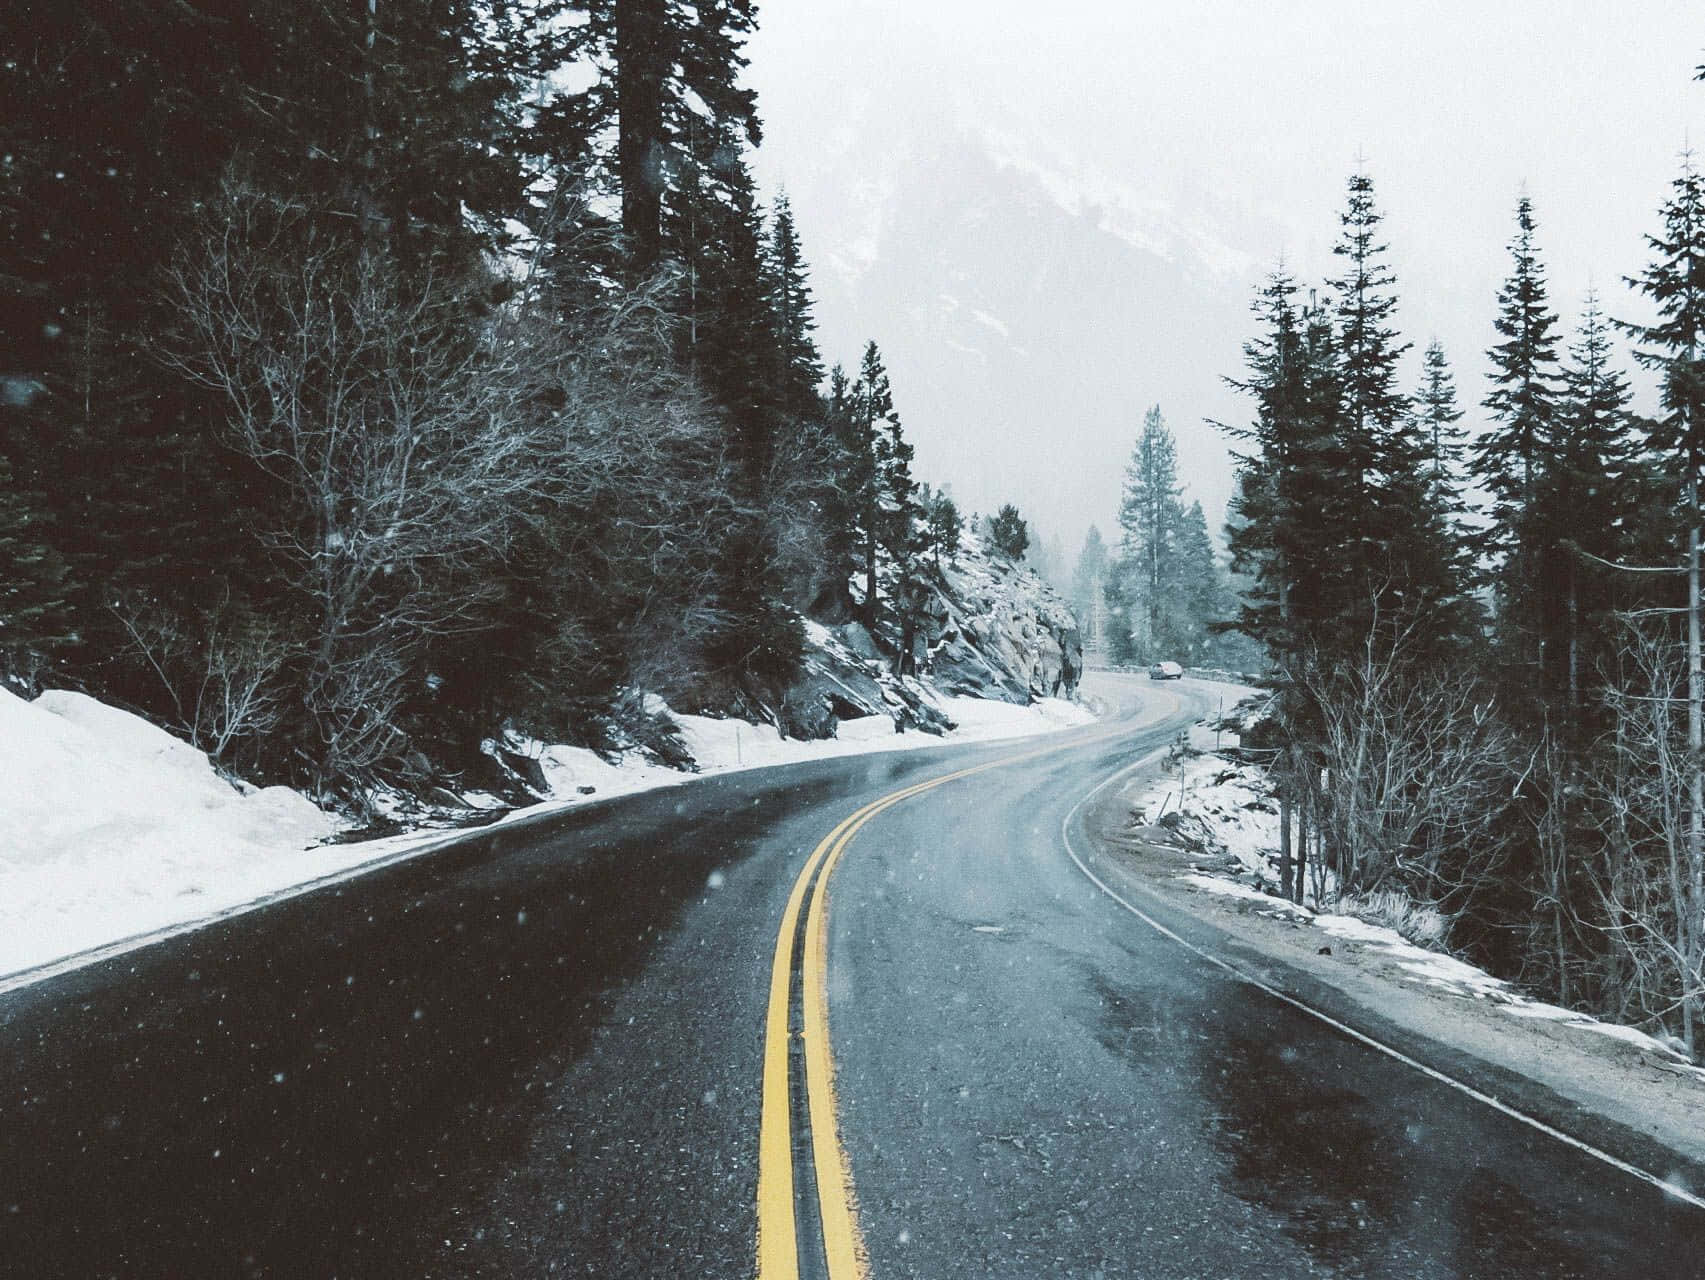 Caption: A serene Snowy Road amidst snow-covered trees Wallpaper